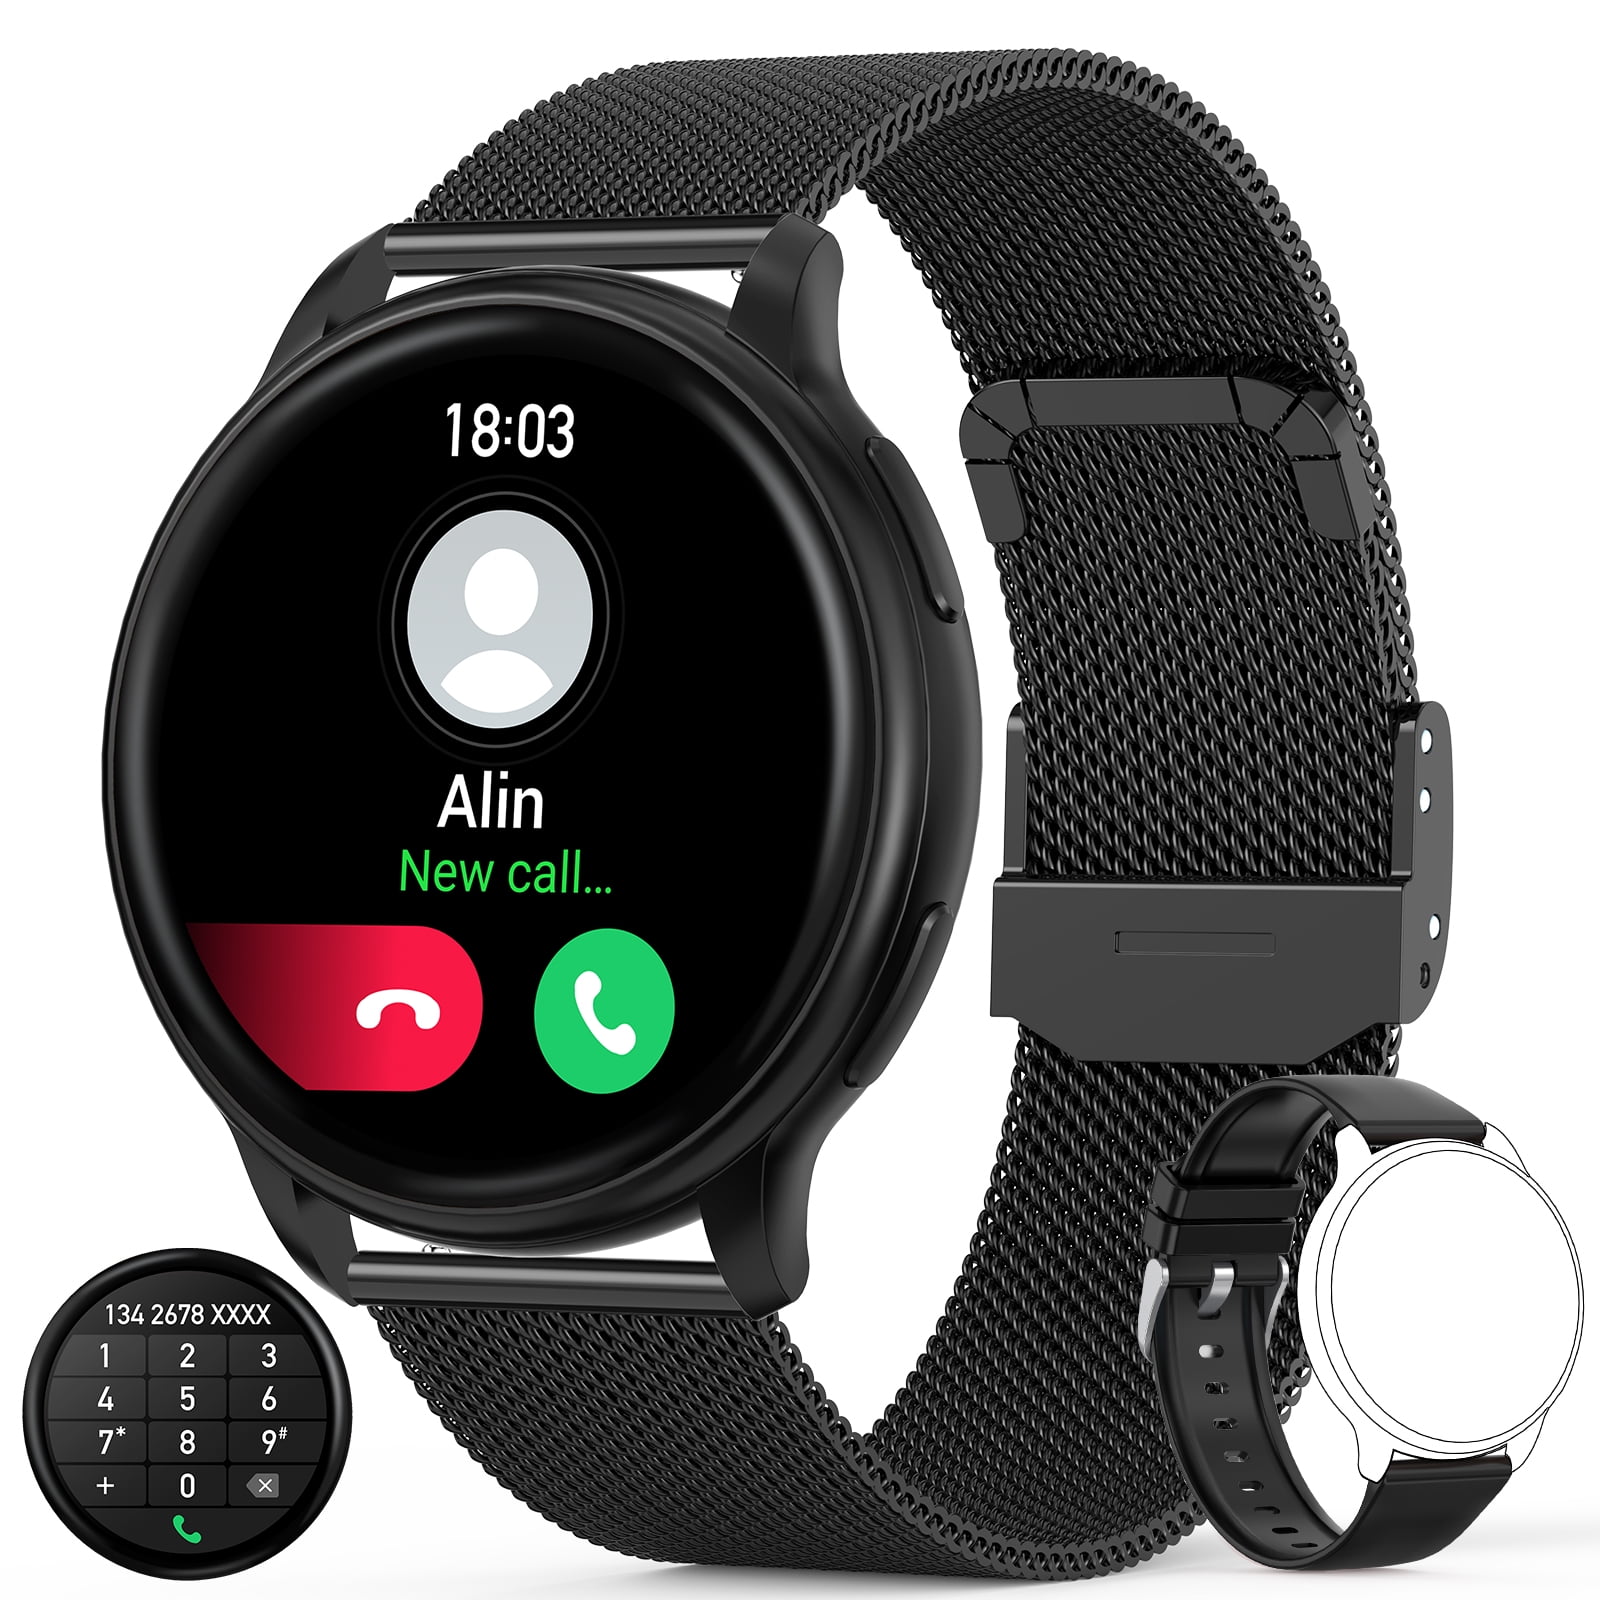 ZKCREATION W33B Smart Watch Call Receive/Dial Fitness Watches Women Men, Waterproof Smartwatch for Android iOS iPhone Samsung Phones with Text and Call Heart Rate Blood Pressure Monitor, Black - Walmart.com